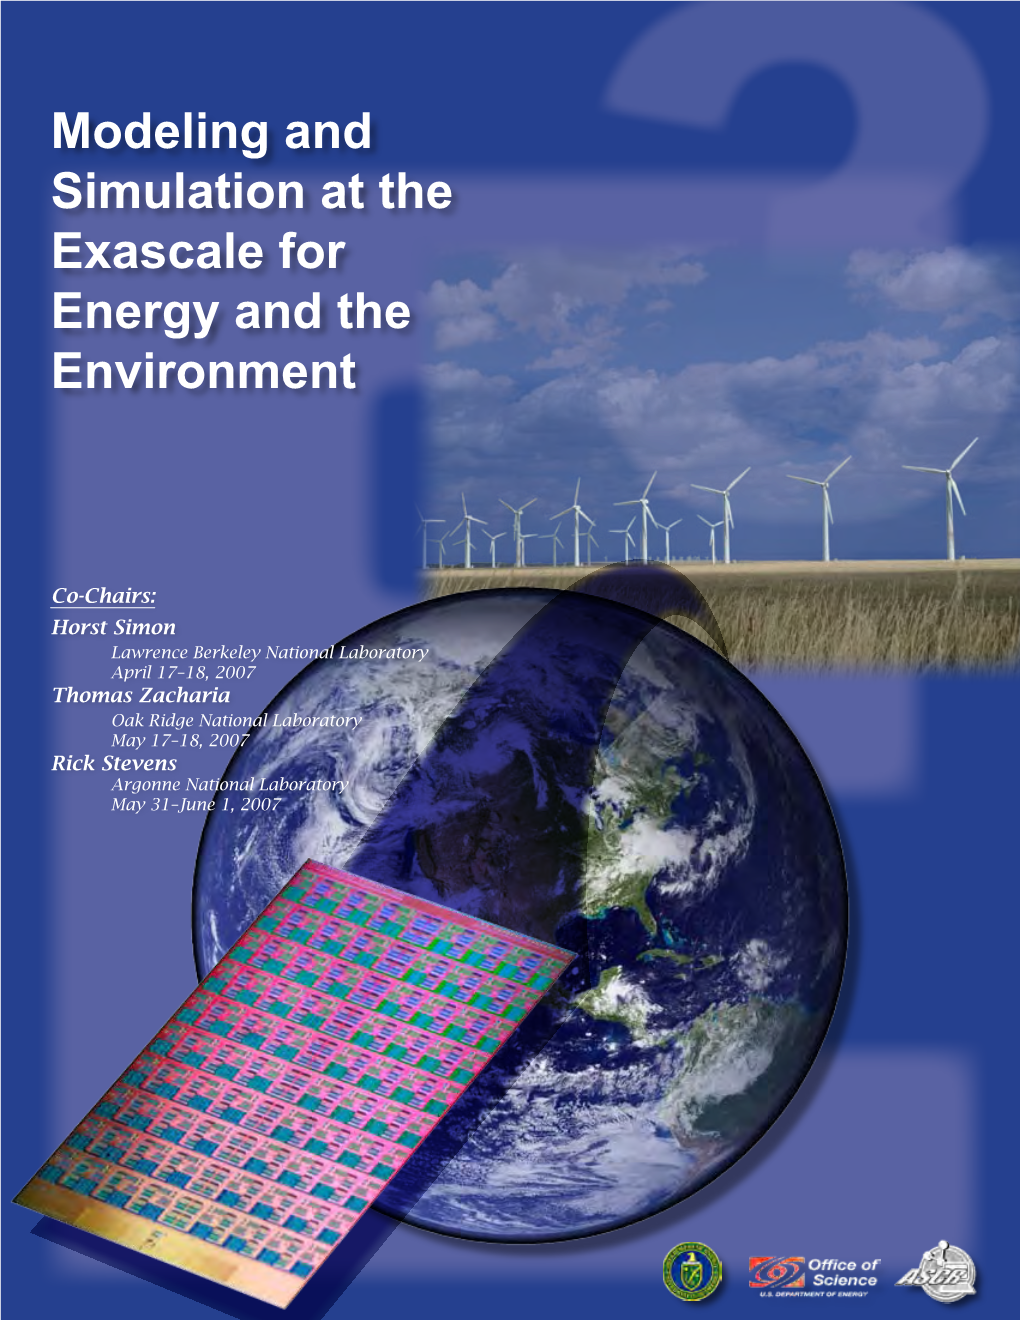 Modeling and Simulation at the Exascale for Energy and the Environment